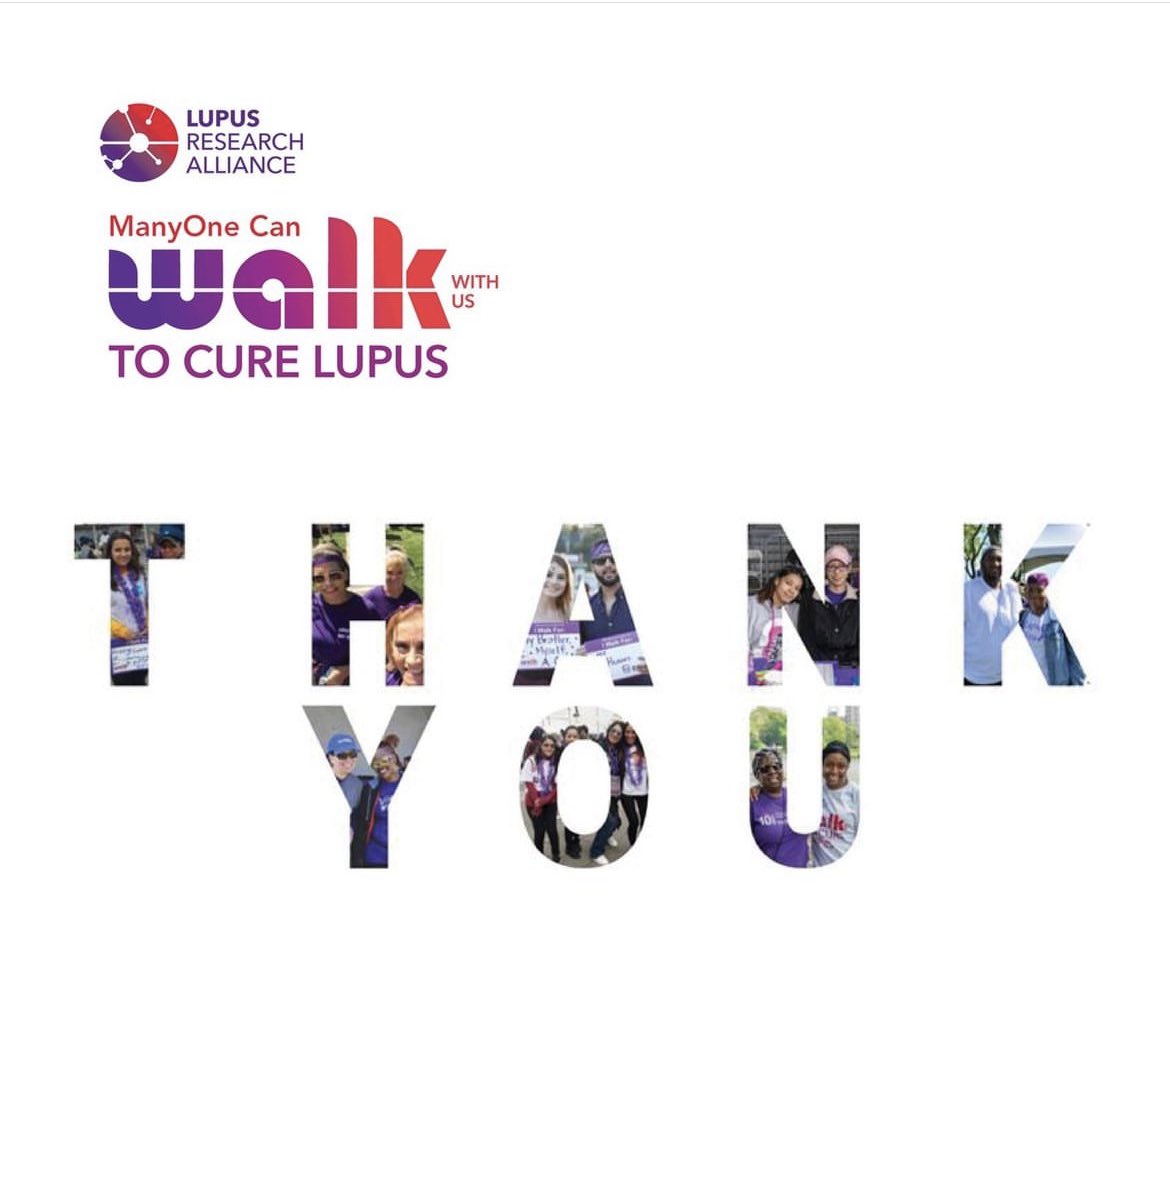 THANK YOU to our walkers, sponsors, and everyone who attended the #ManyOneCan Northern Michigan Walk with Us to Cure Lupus! 

We’re so proud to see this community rally around their commitment to one goal: supporting #lupusresearch. 

#lupus #walktocurelupus #WalkwithUs